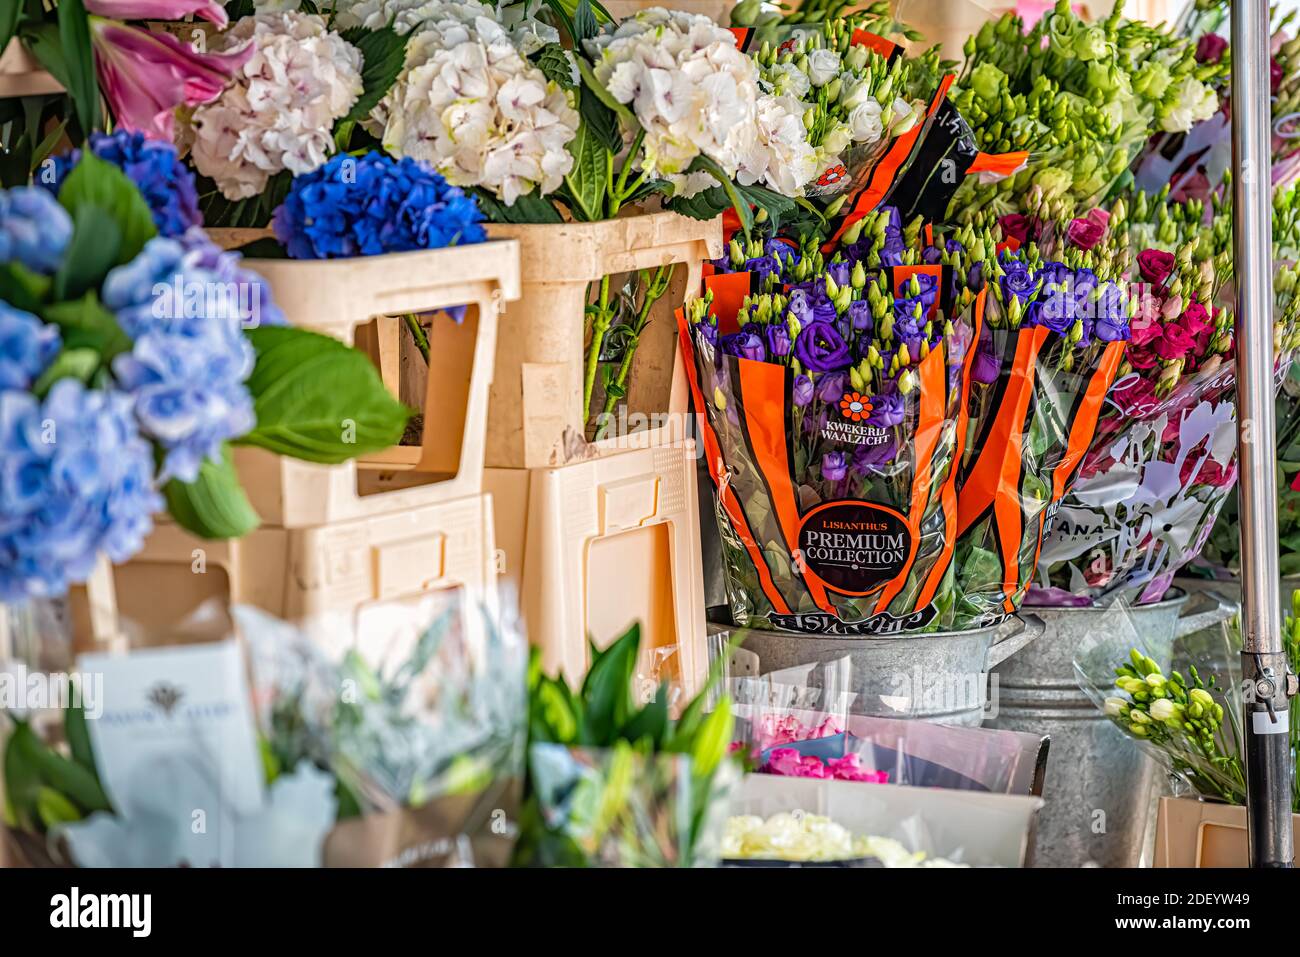 London, UK - June 23, 2018: Retail display of bouquets of hyacinth and roses flowers at florist store shop stand or stall outside outdoors on street o Stock Photo